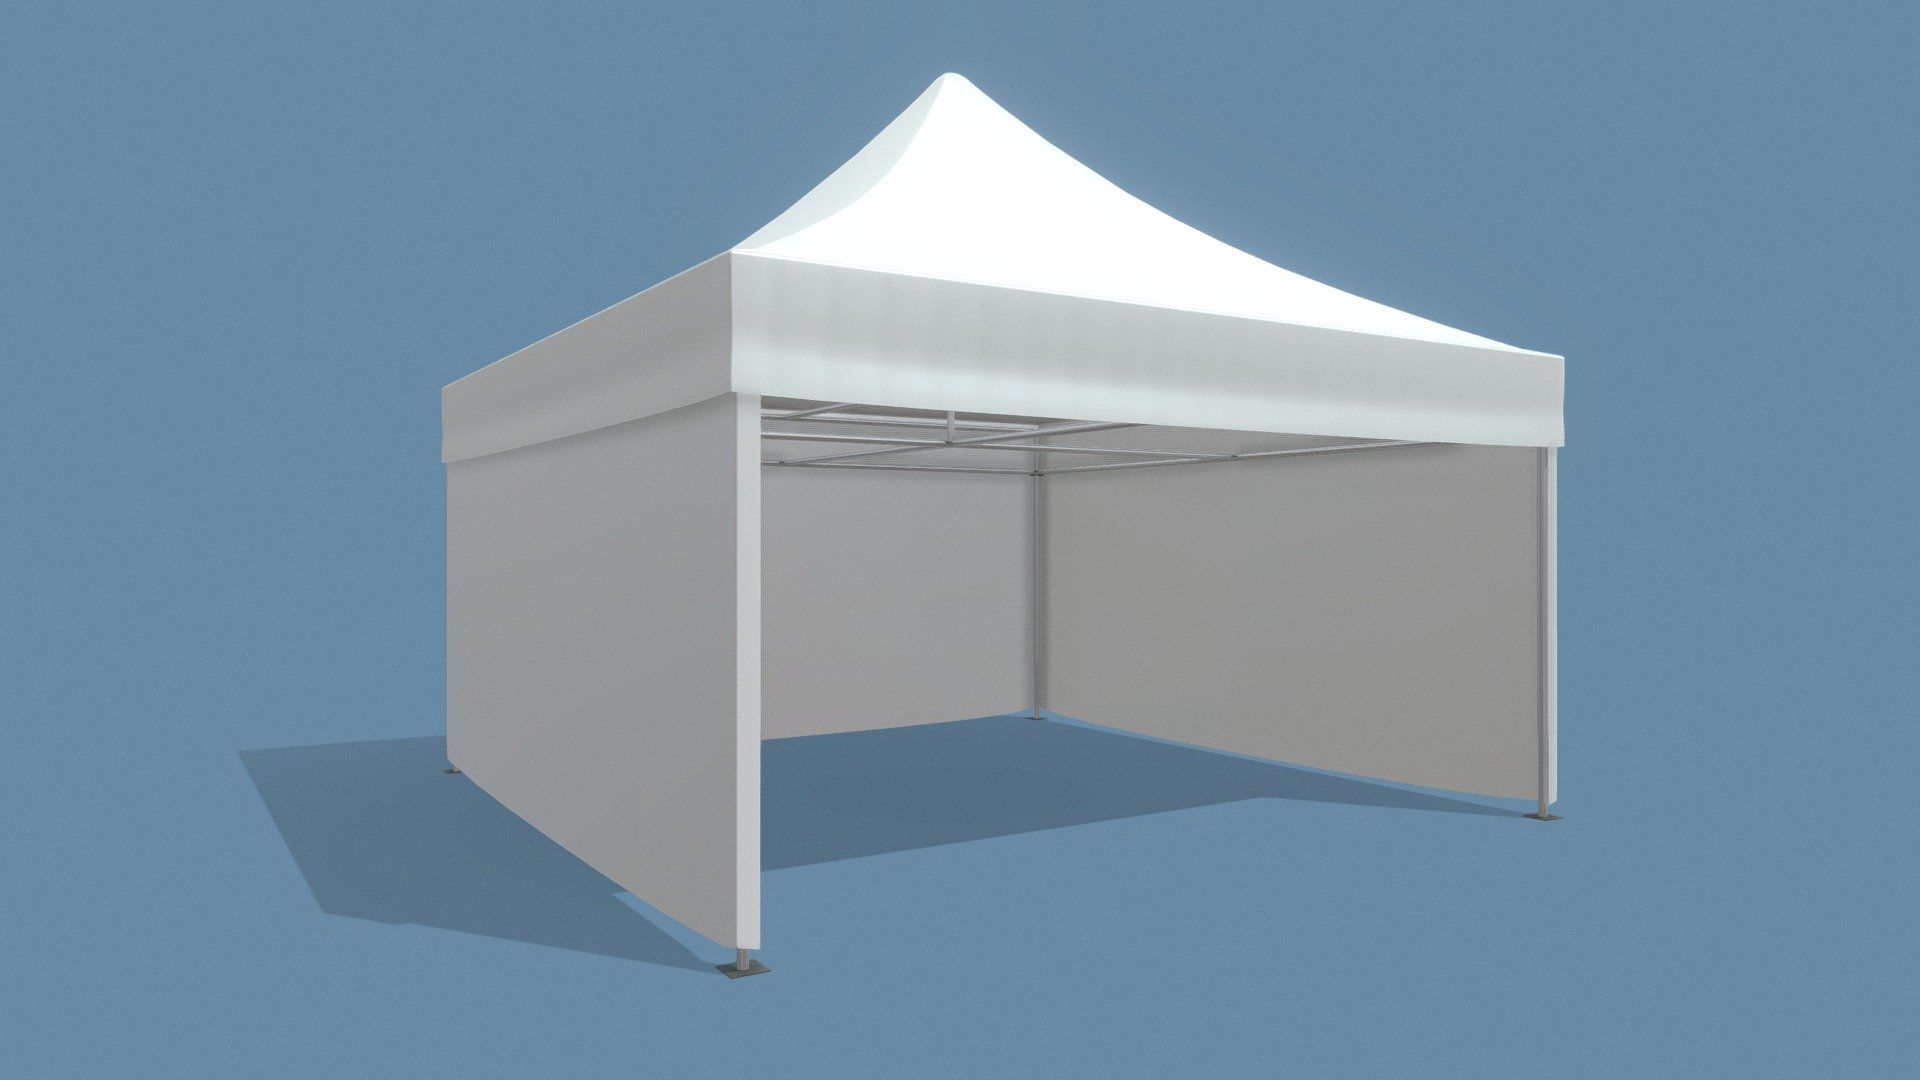 Commercial Tent 5x5 Meters

Measurements:




5.00m x 5.00m x 4.48m (L,W,H)

IMPORTANT NOTES:




This model does not have textures or materials, but it has separate generic materials, it is also separated into parts, so you can easily assign your own materials.

Model units are in meters.

If you have any questions about this model, you can send us a message 3d model